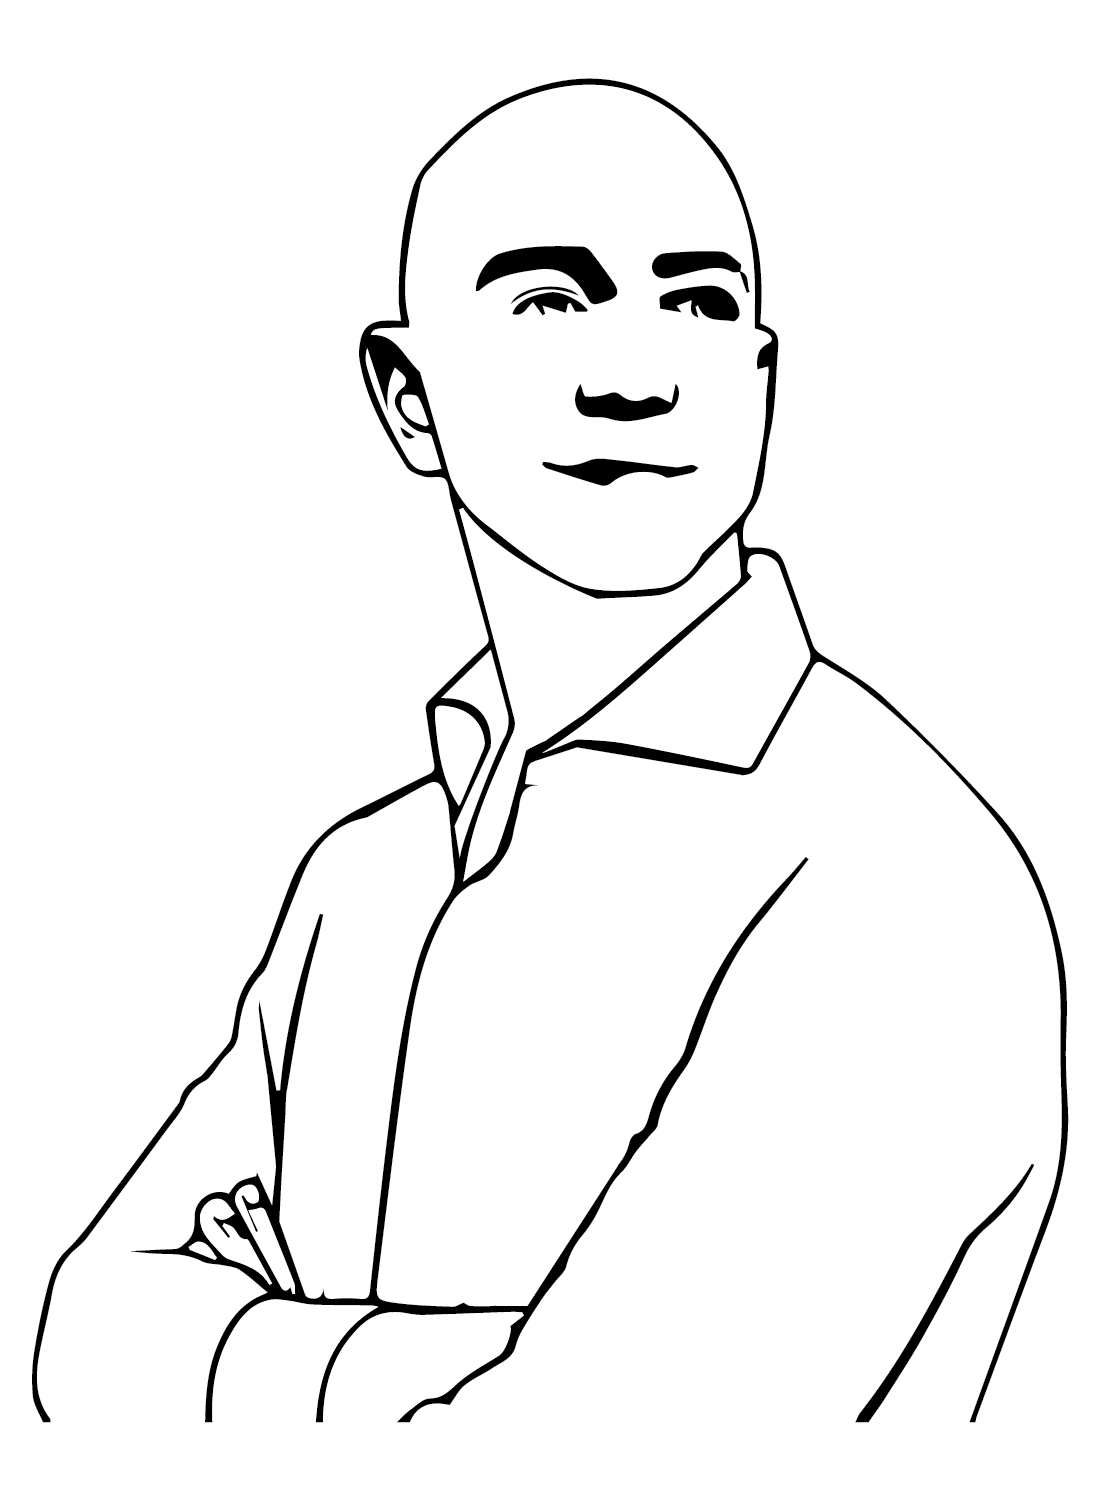 Jeff bezos coloring pages printable for free download